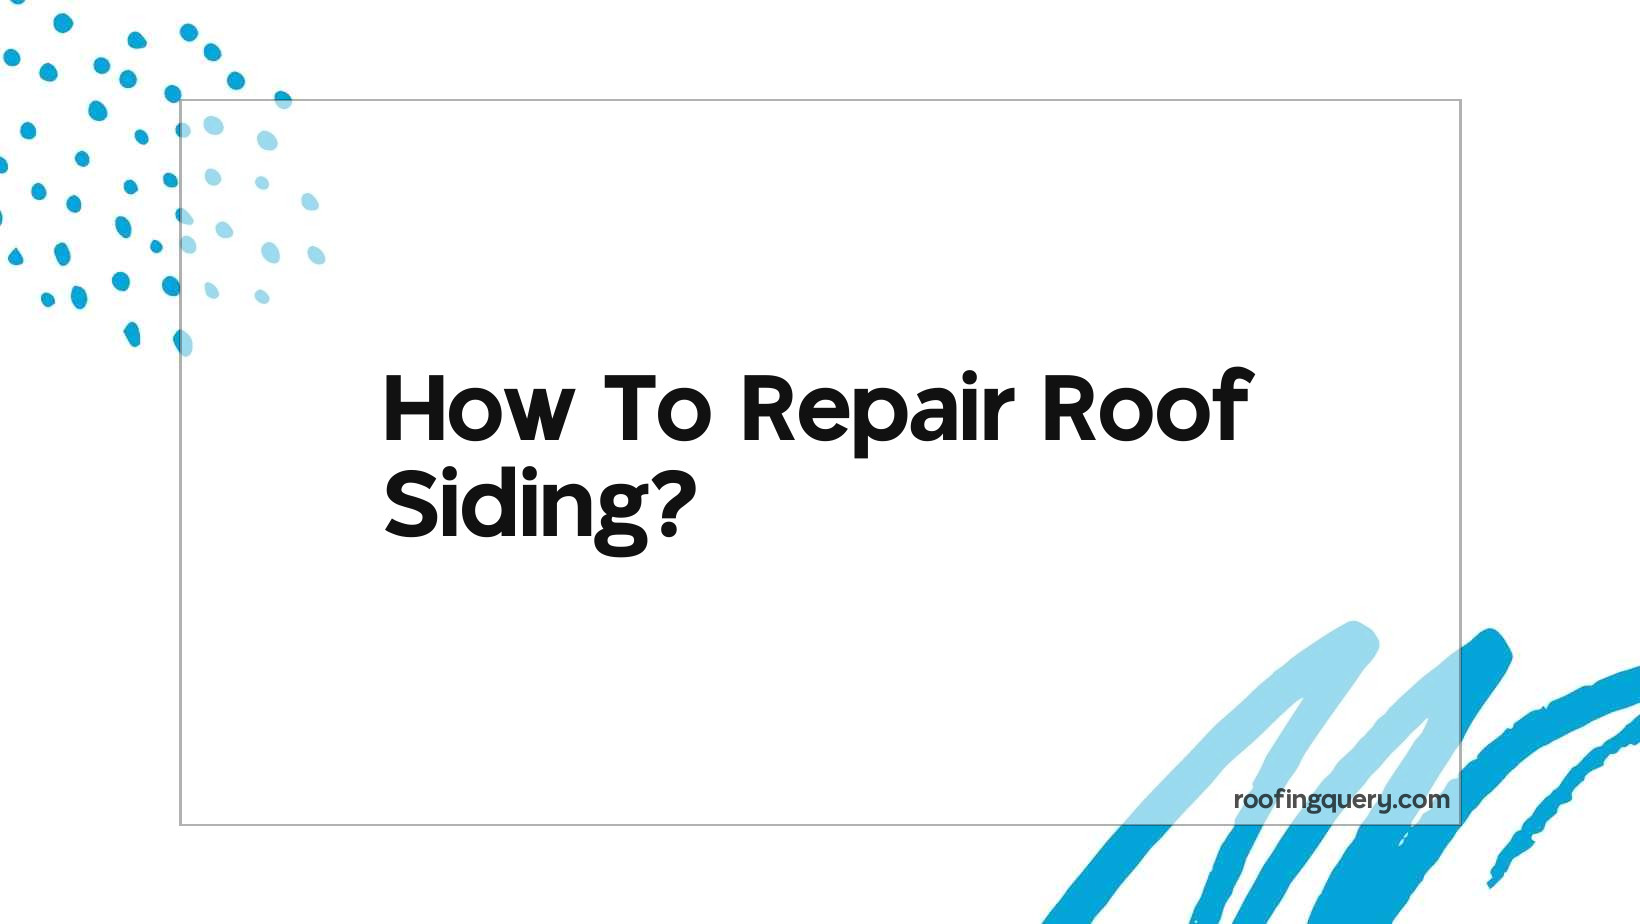 How To Repair Roof Siding?